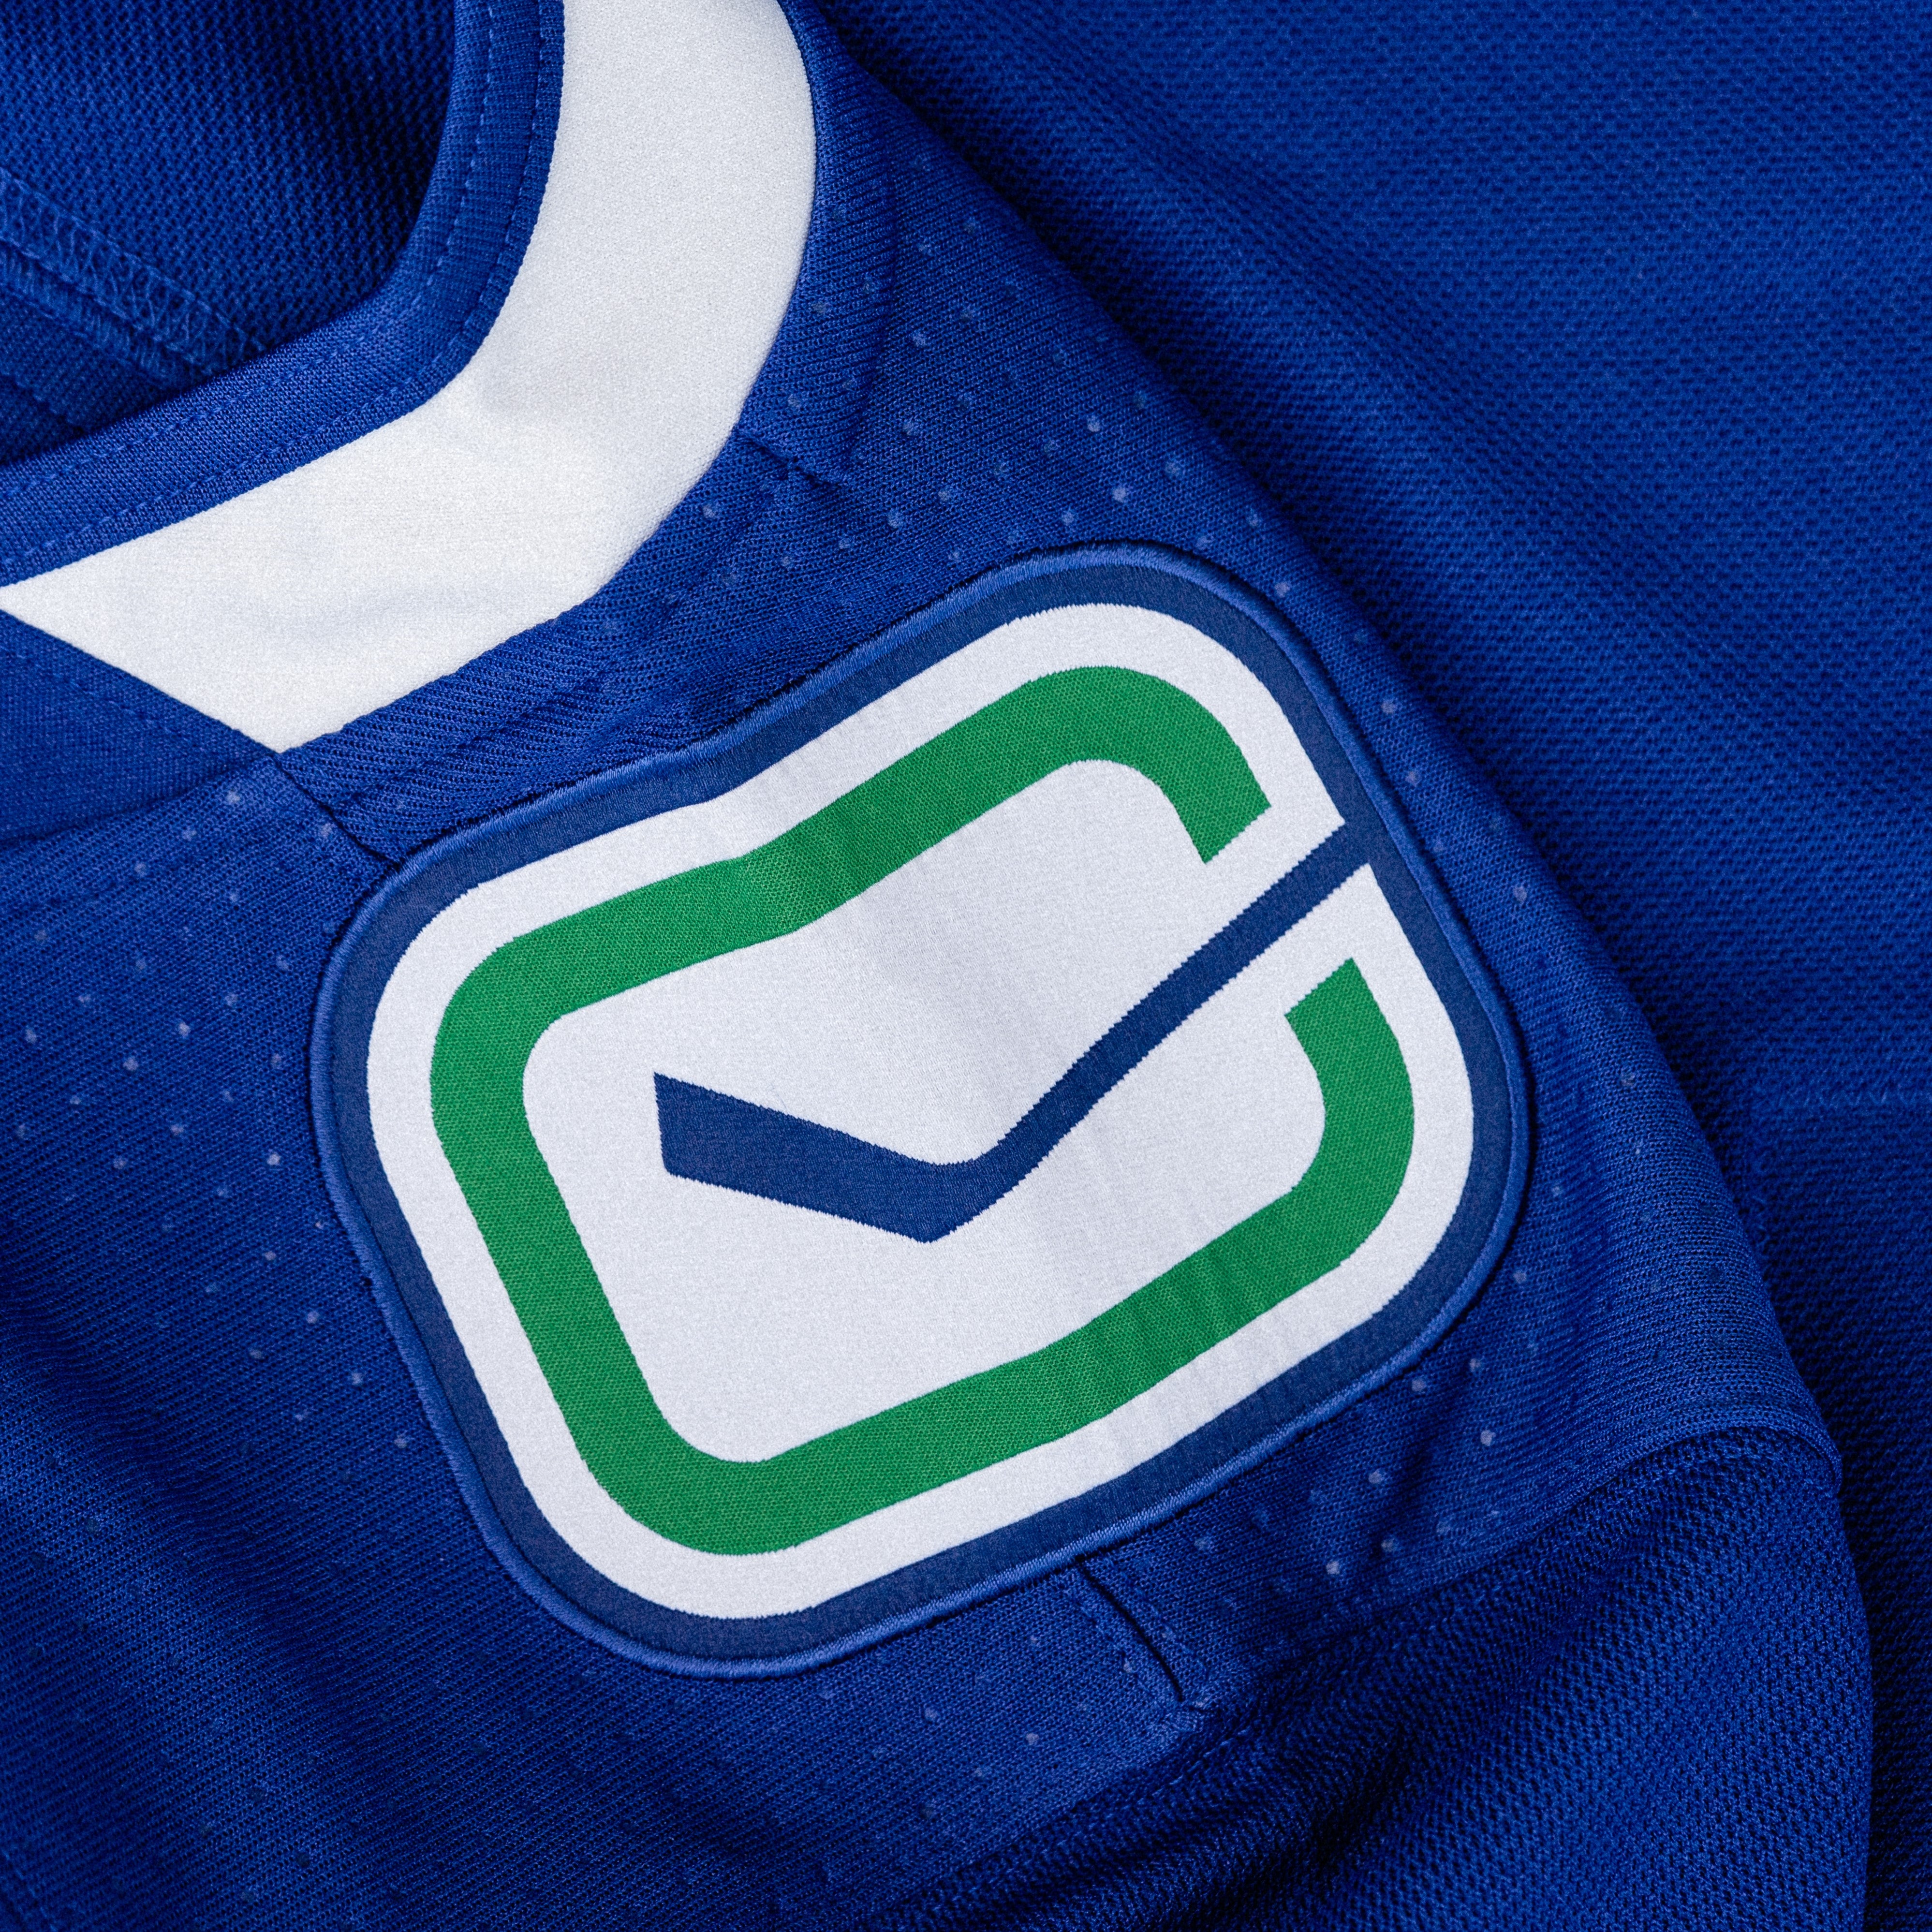 Win a #Canucks jersey! For every goal the Canucks score tonight,  @nutrlvodka soda will give one lucky fan a Canucks jersey. Tag a friend in…